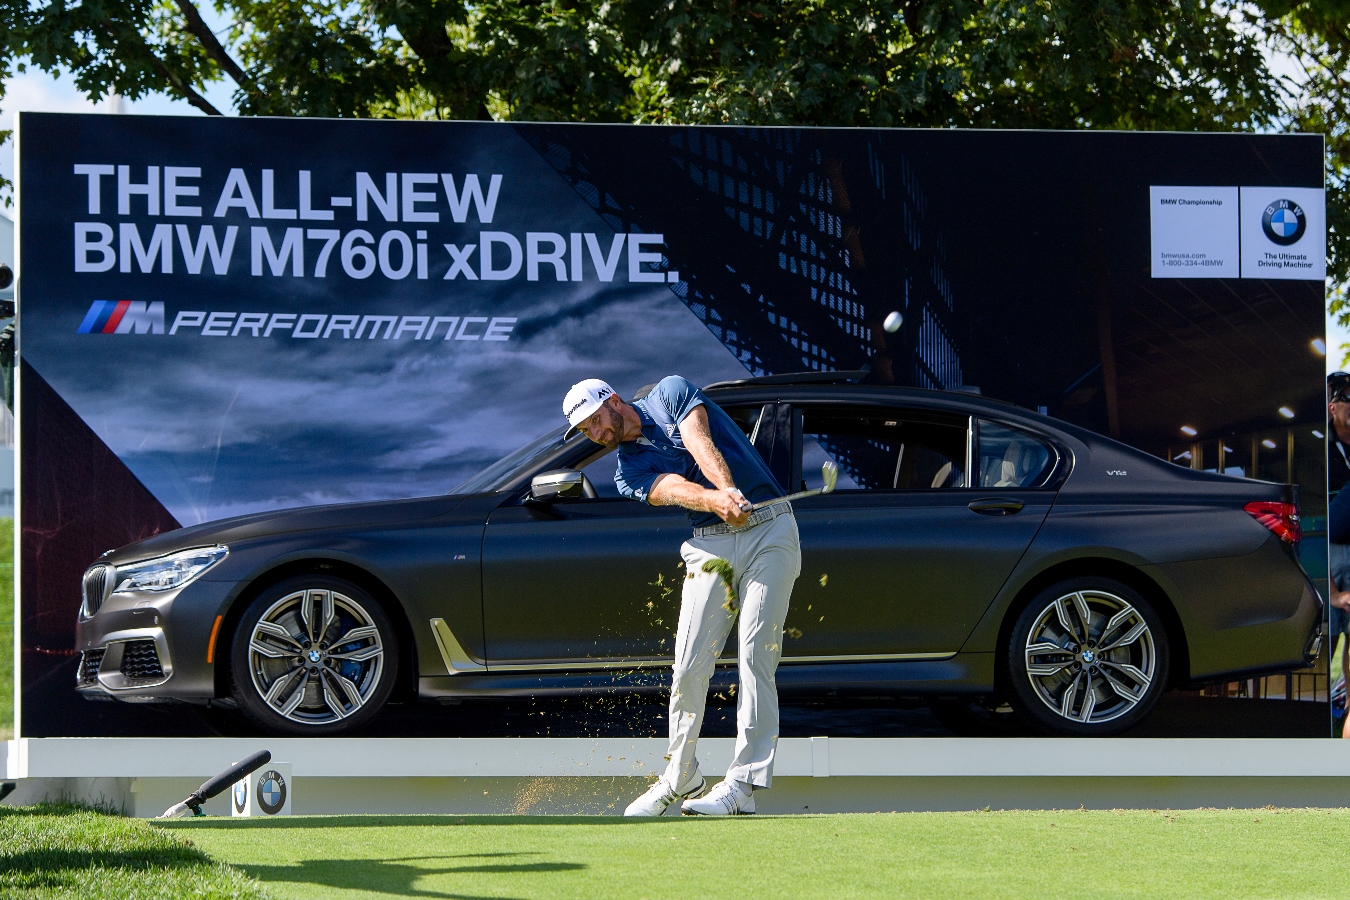 The Top 70 Players on the PGA TOUR Tee-off at the BMW Championship